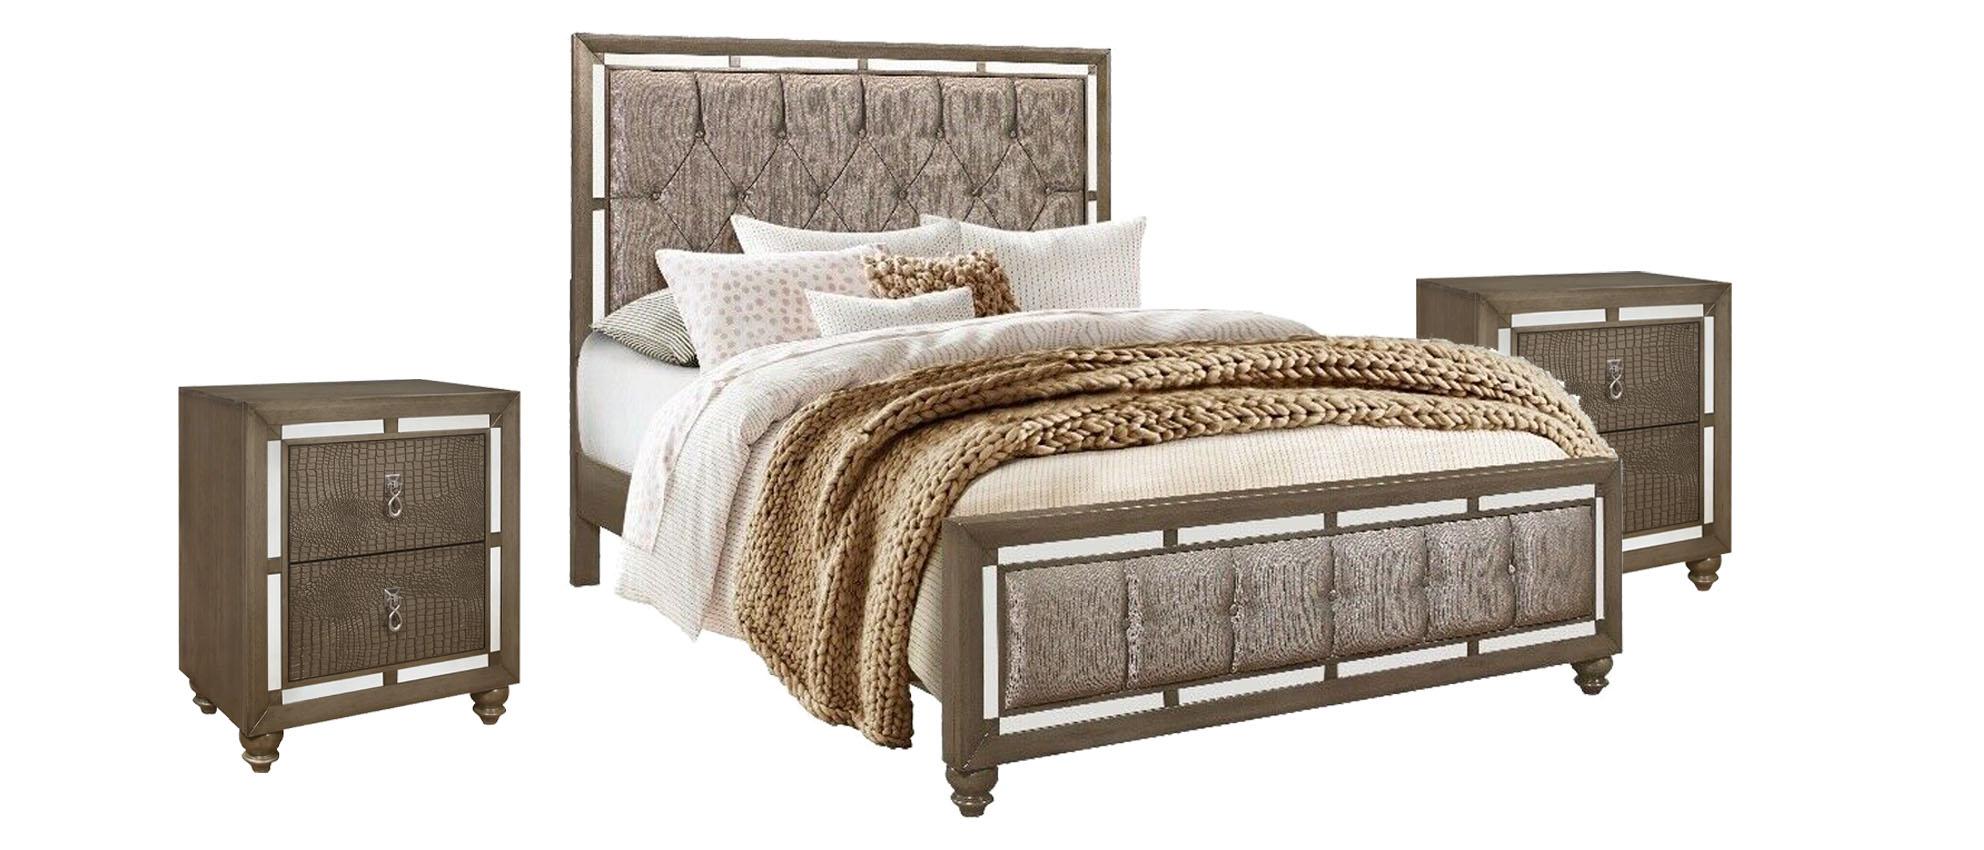 Contemporary Panel Bedroom Set IVY CHAMPAGNE IVY-CHAMPAGNE-QB-Set-3 in Silver, Champagne Fabric